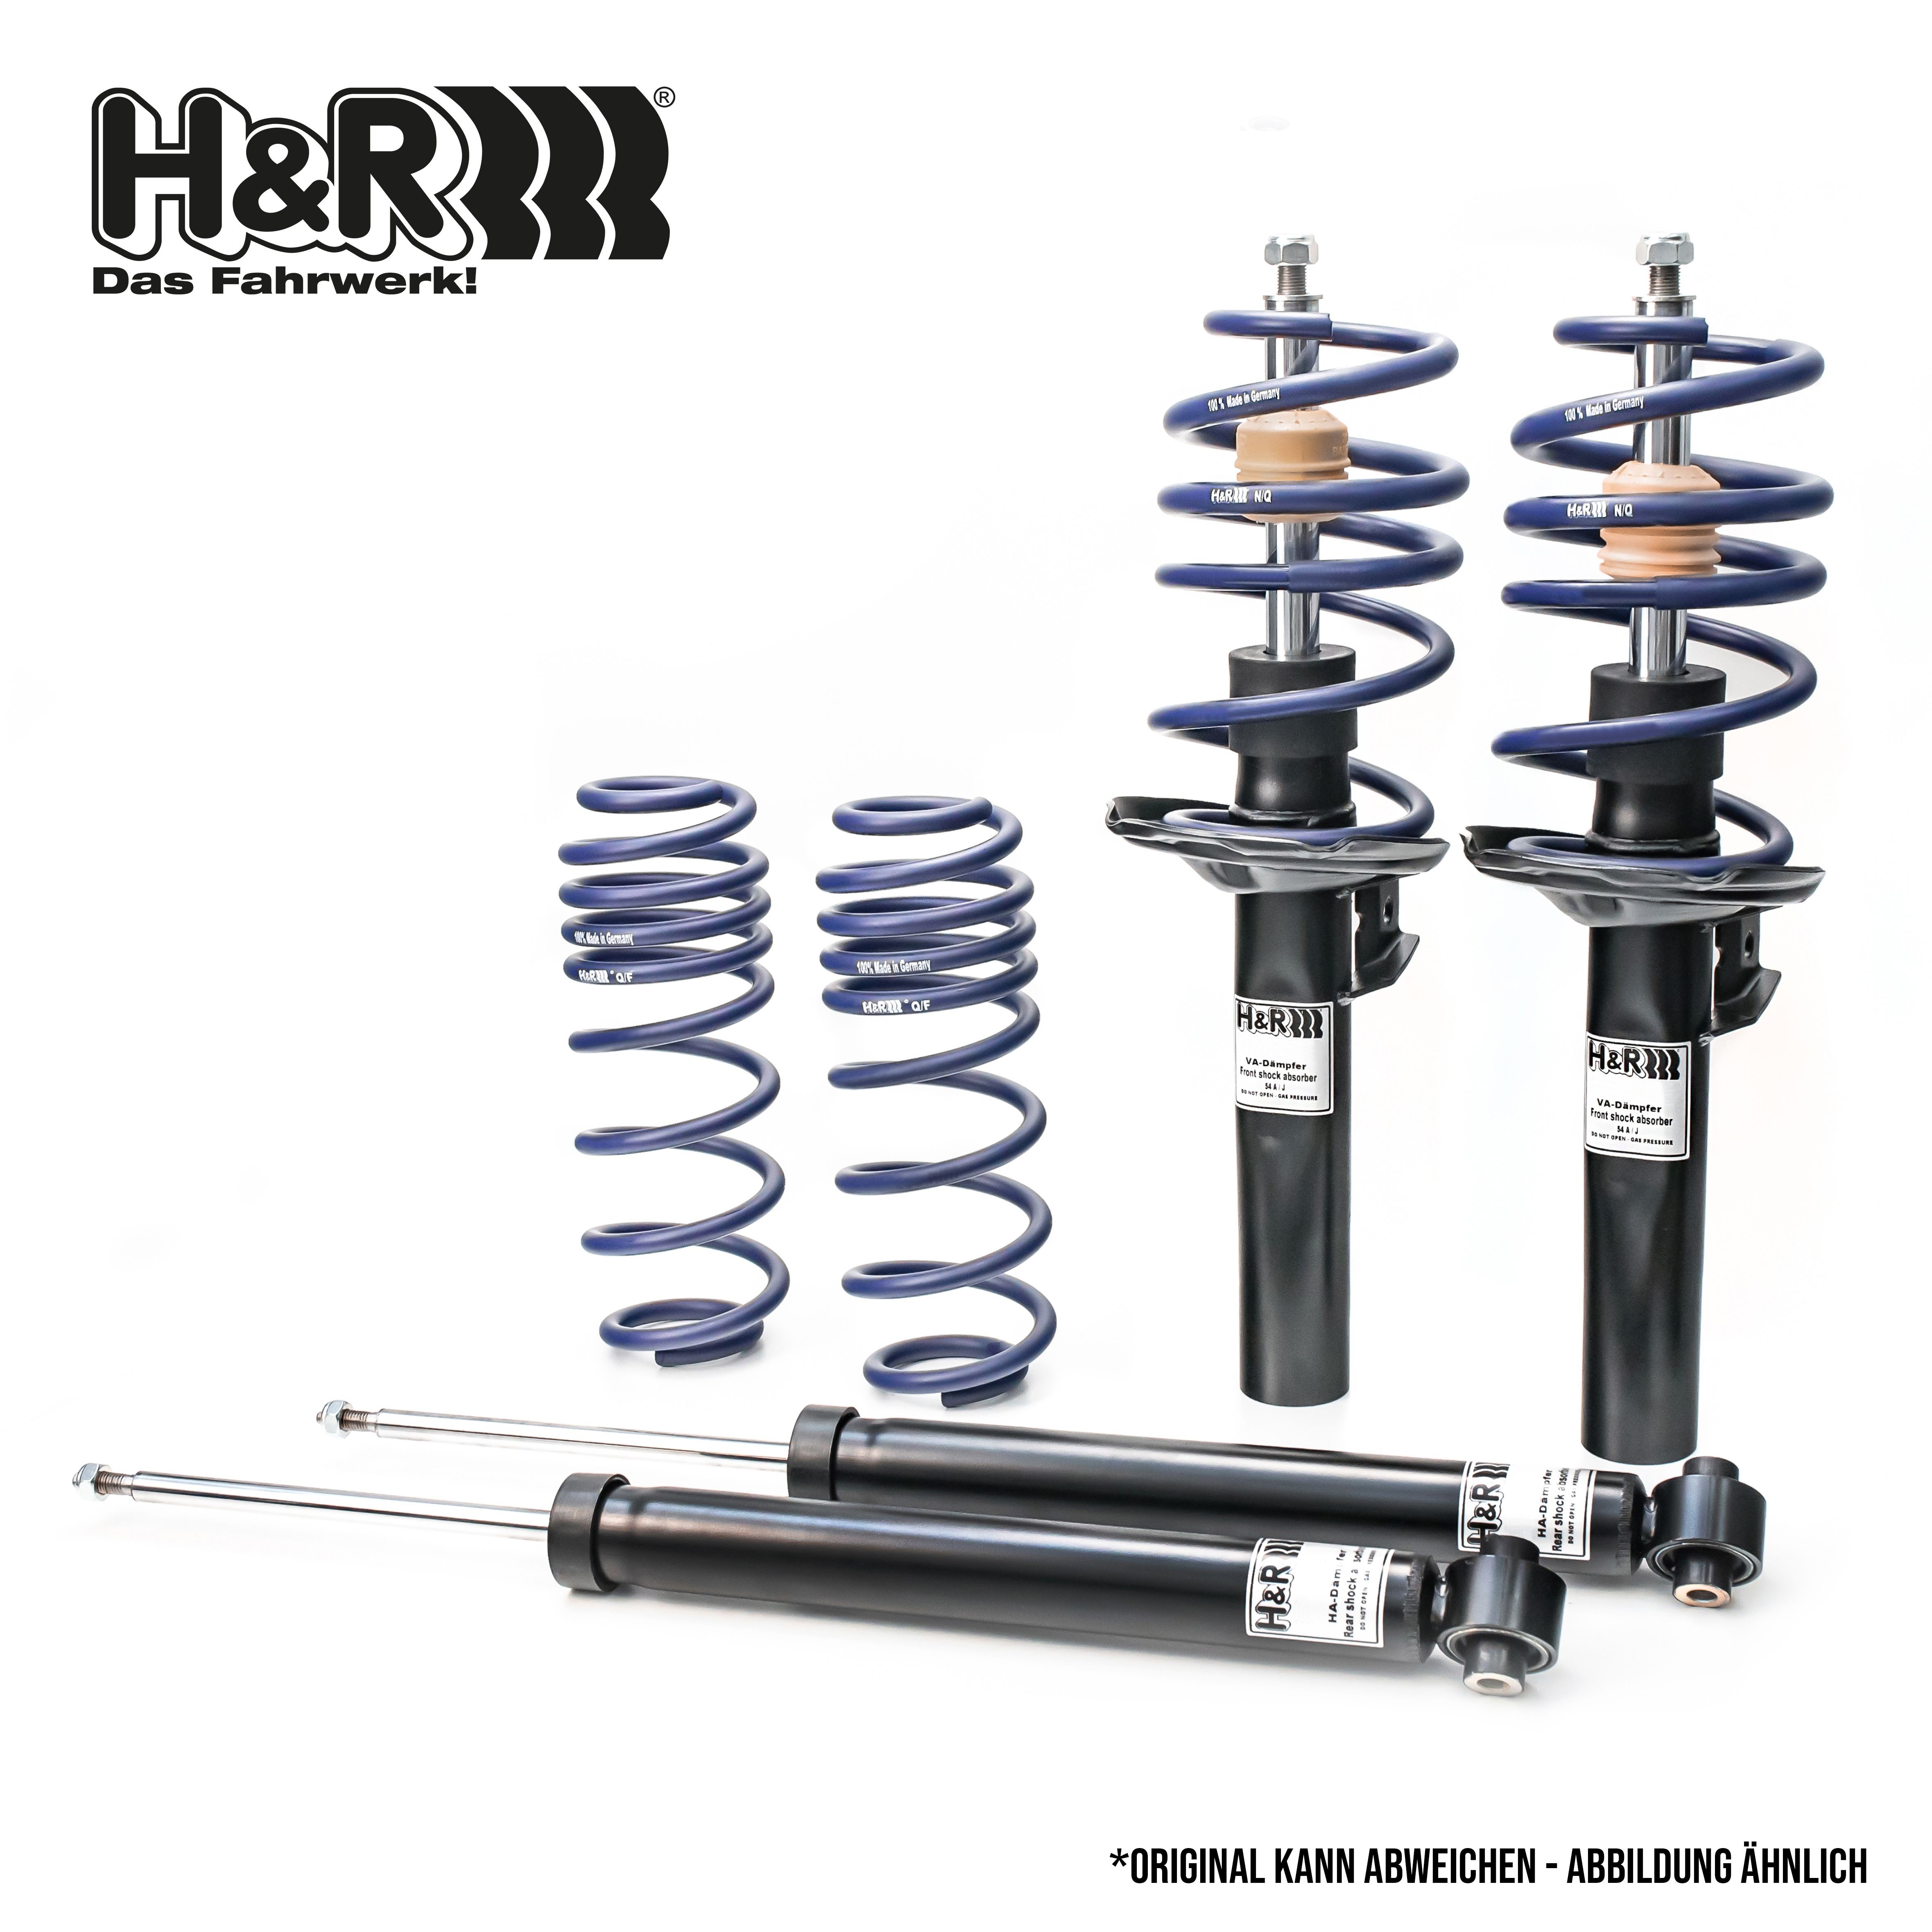 H&R Suspension kit, coil springs / shock absorbers Mercedes C124 new 40749-7